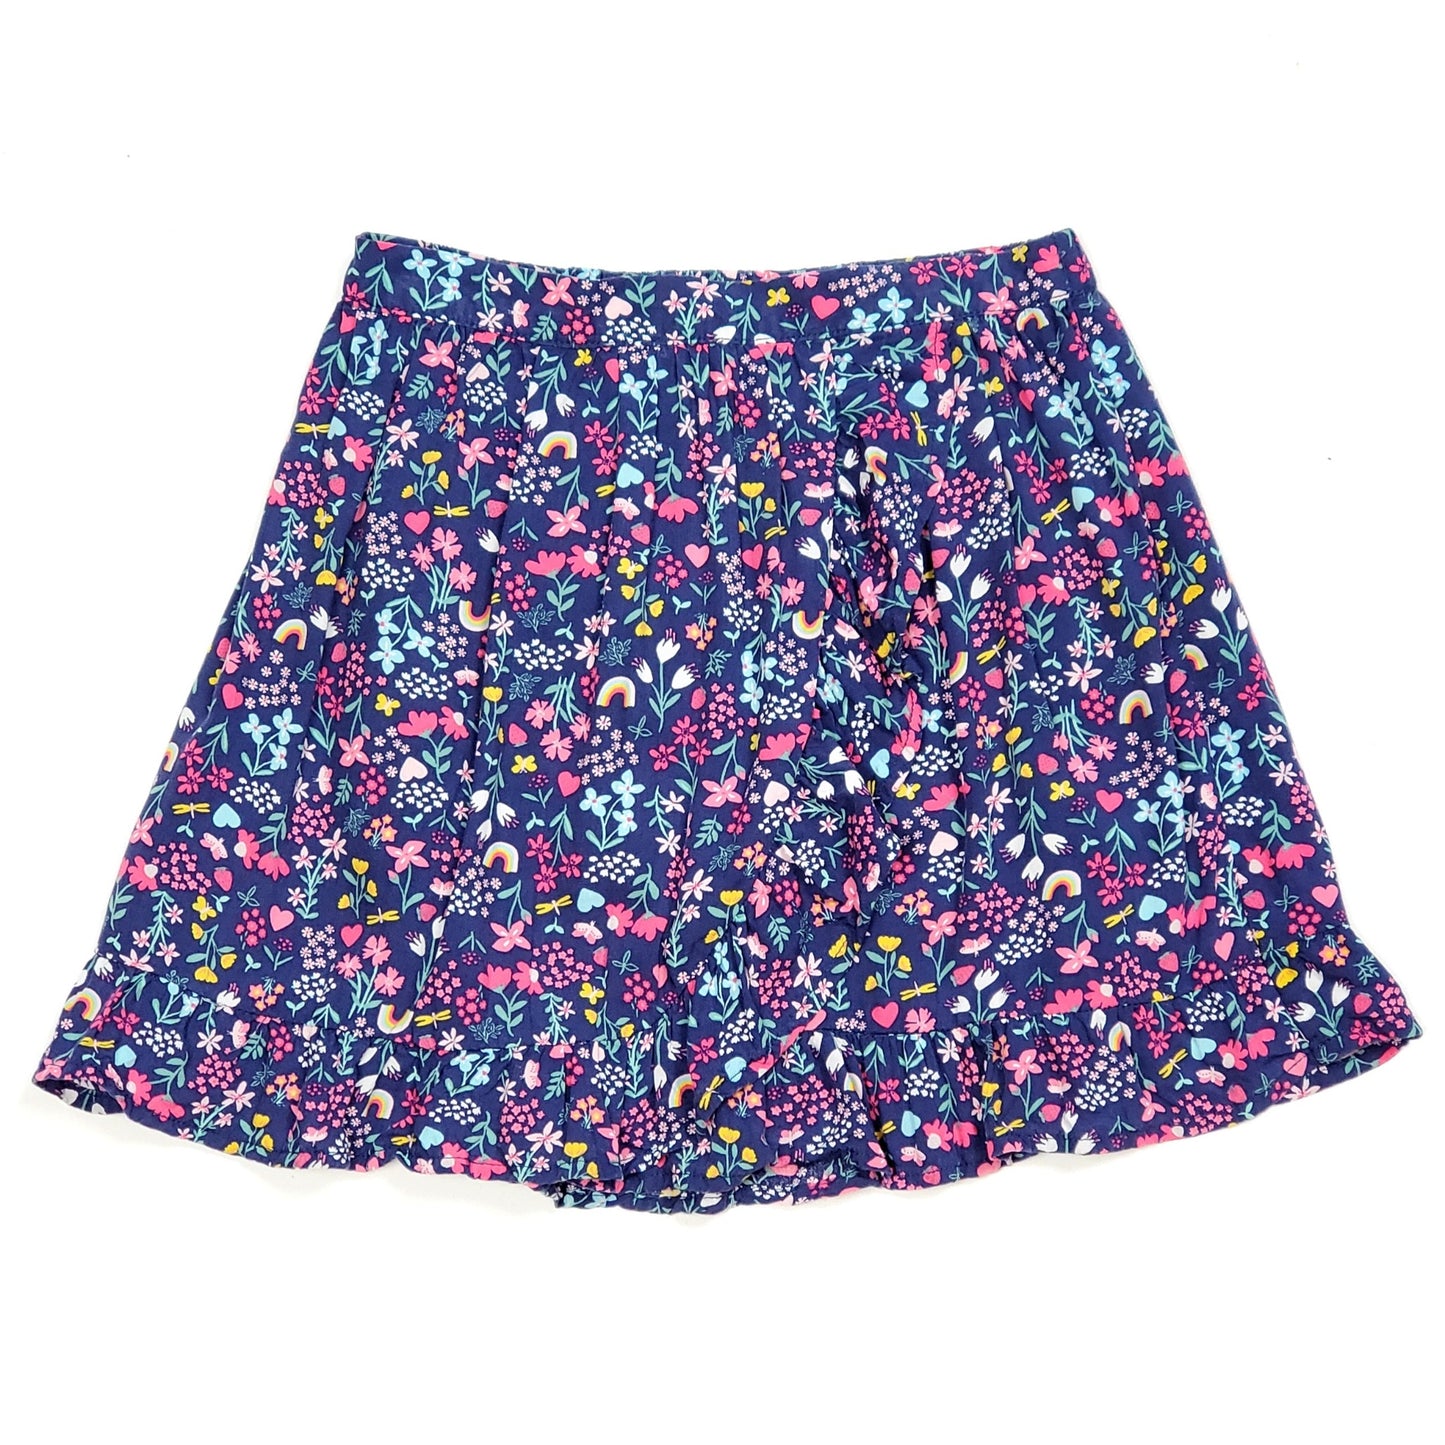 Carters Girls Rainbow Floral Ruffle Skort Size 7 Used View 1